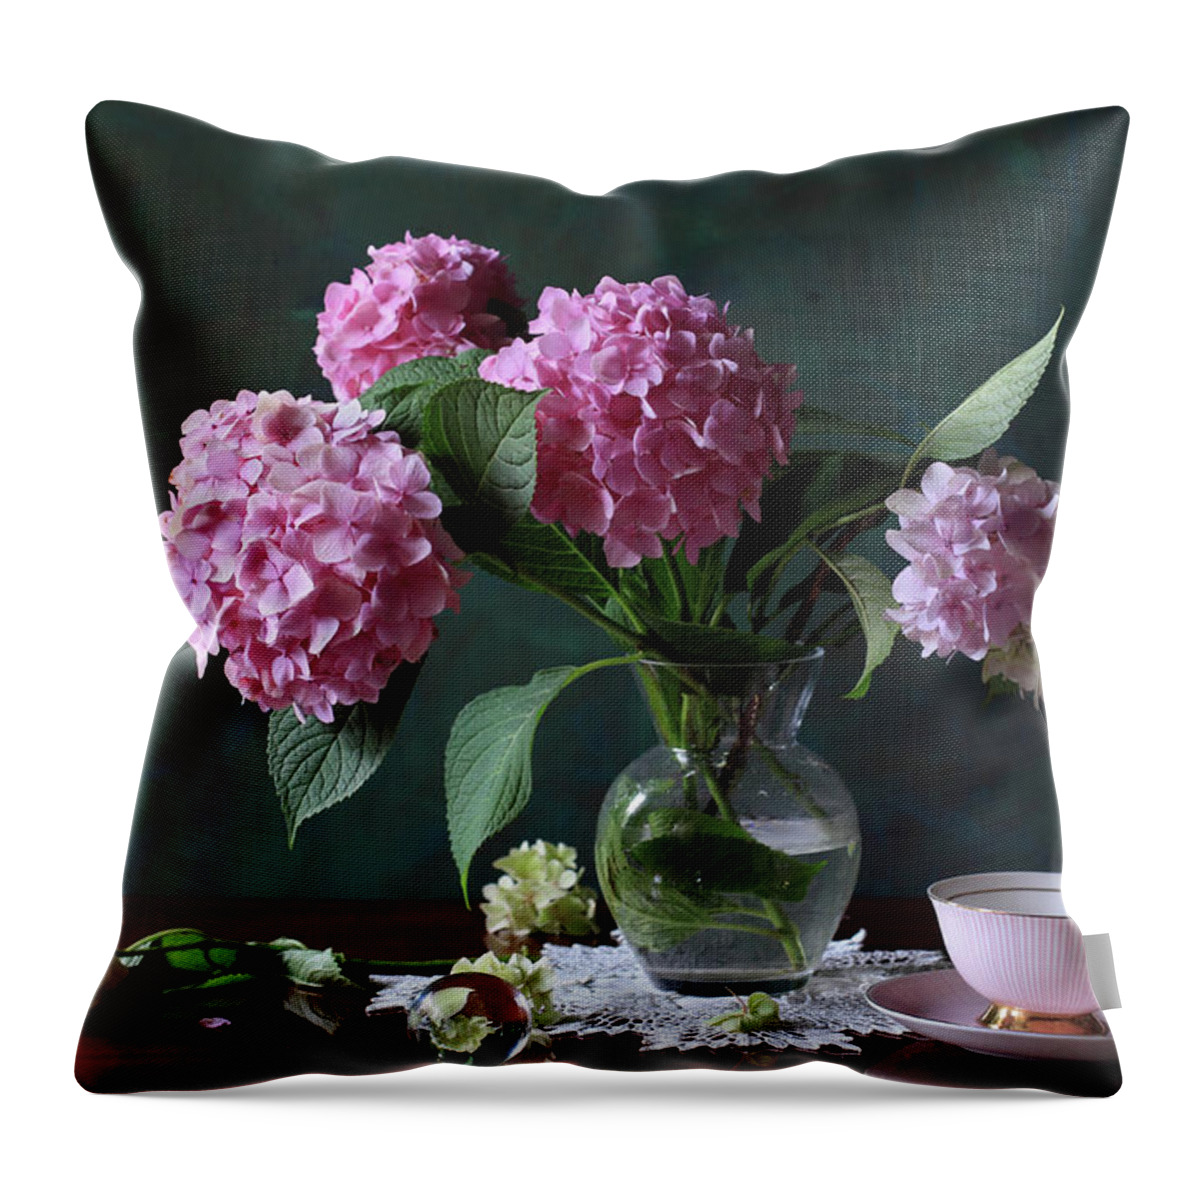 Vase Throw Pillow featuring the photograph Vase With Hortensia Flowers by Panga Natalie Ukraine